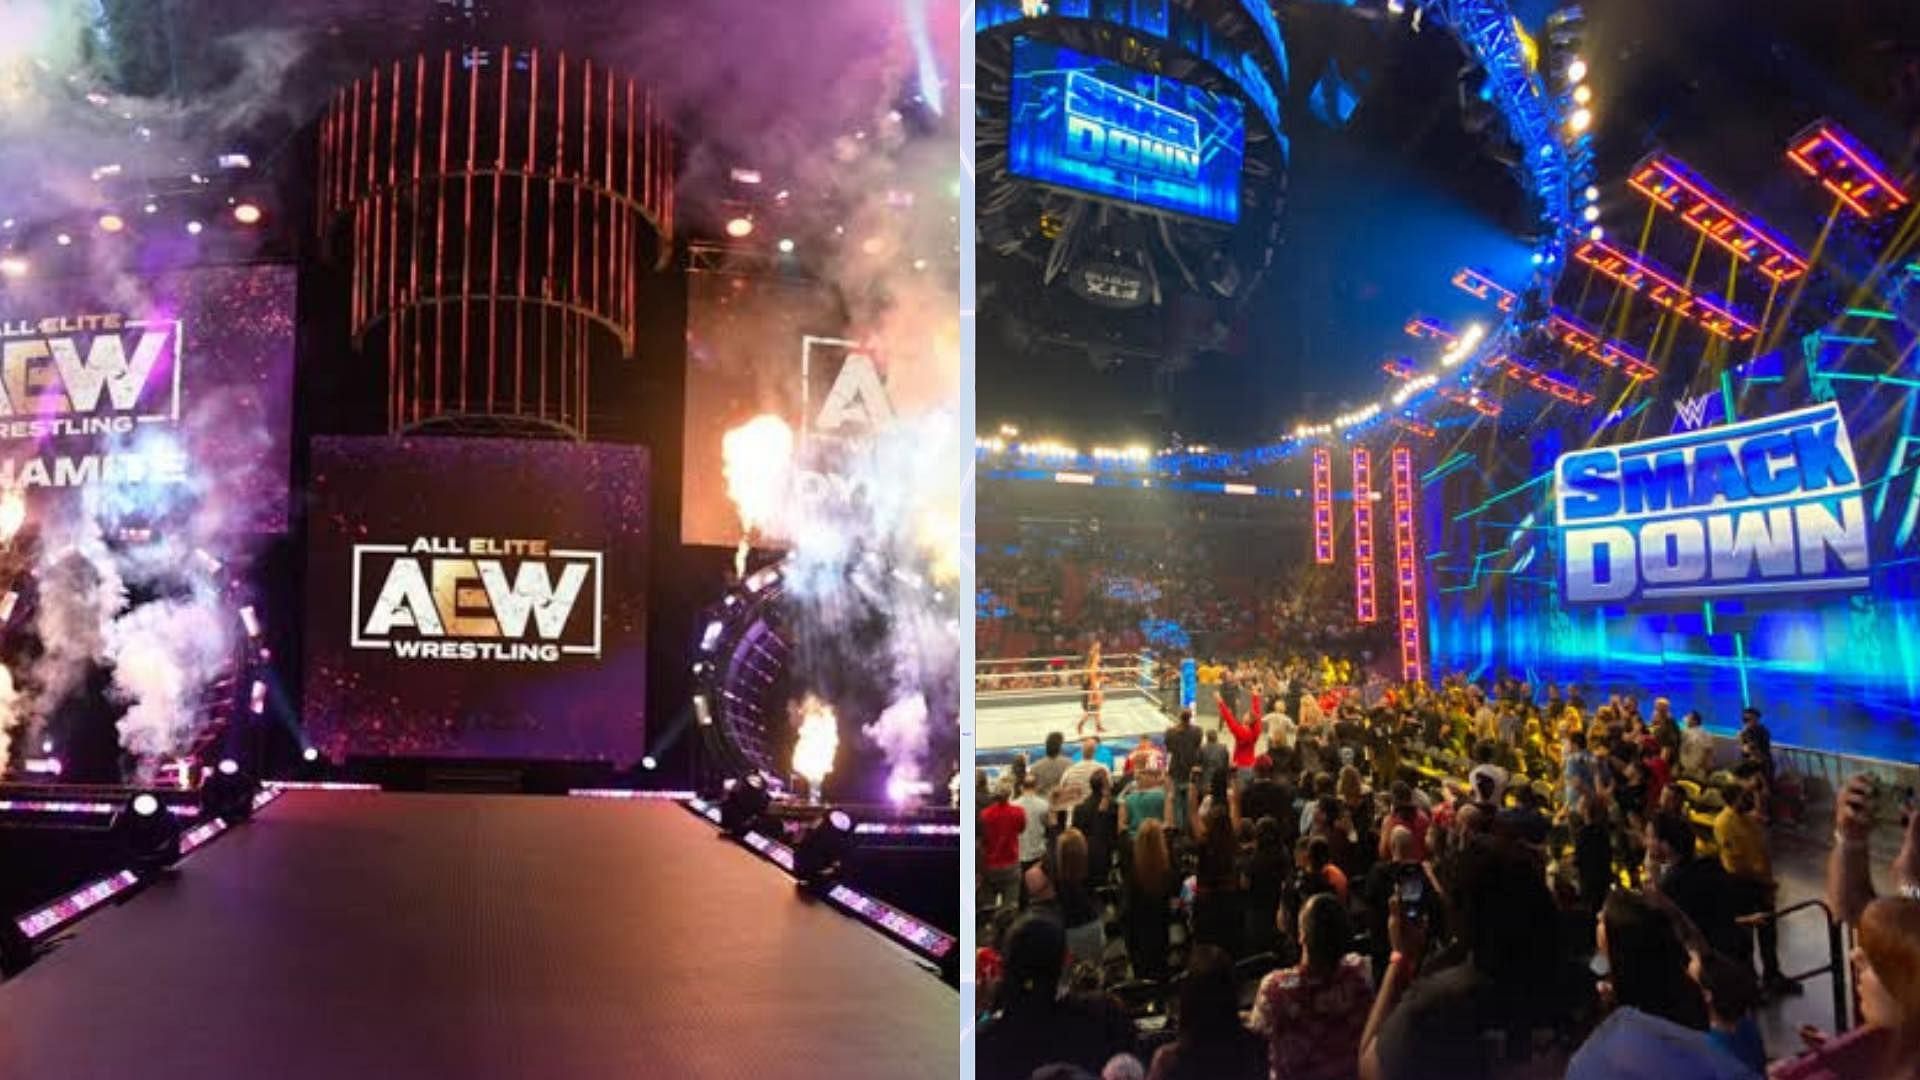 AEW and SmackDown arena